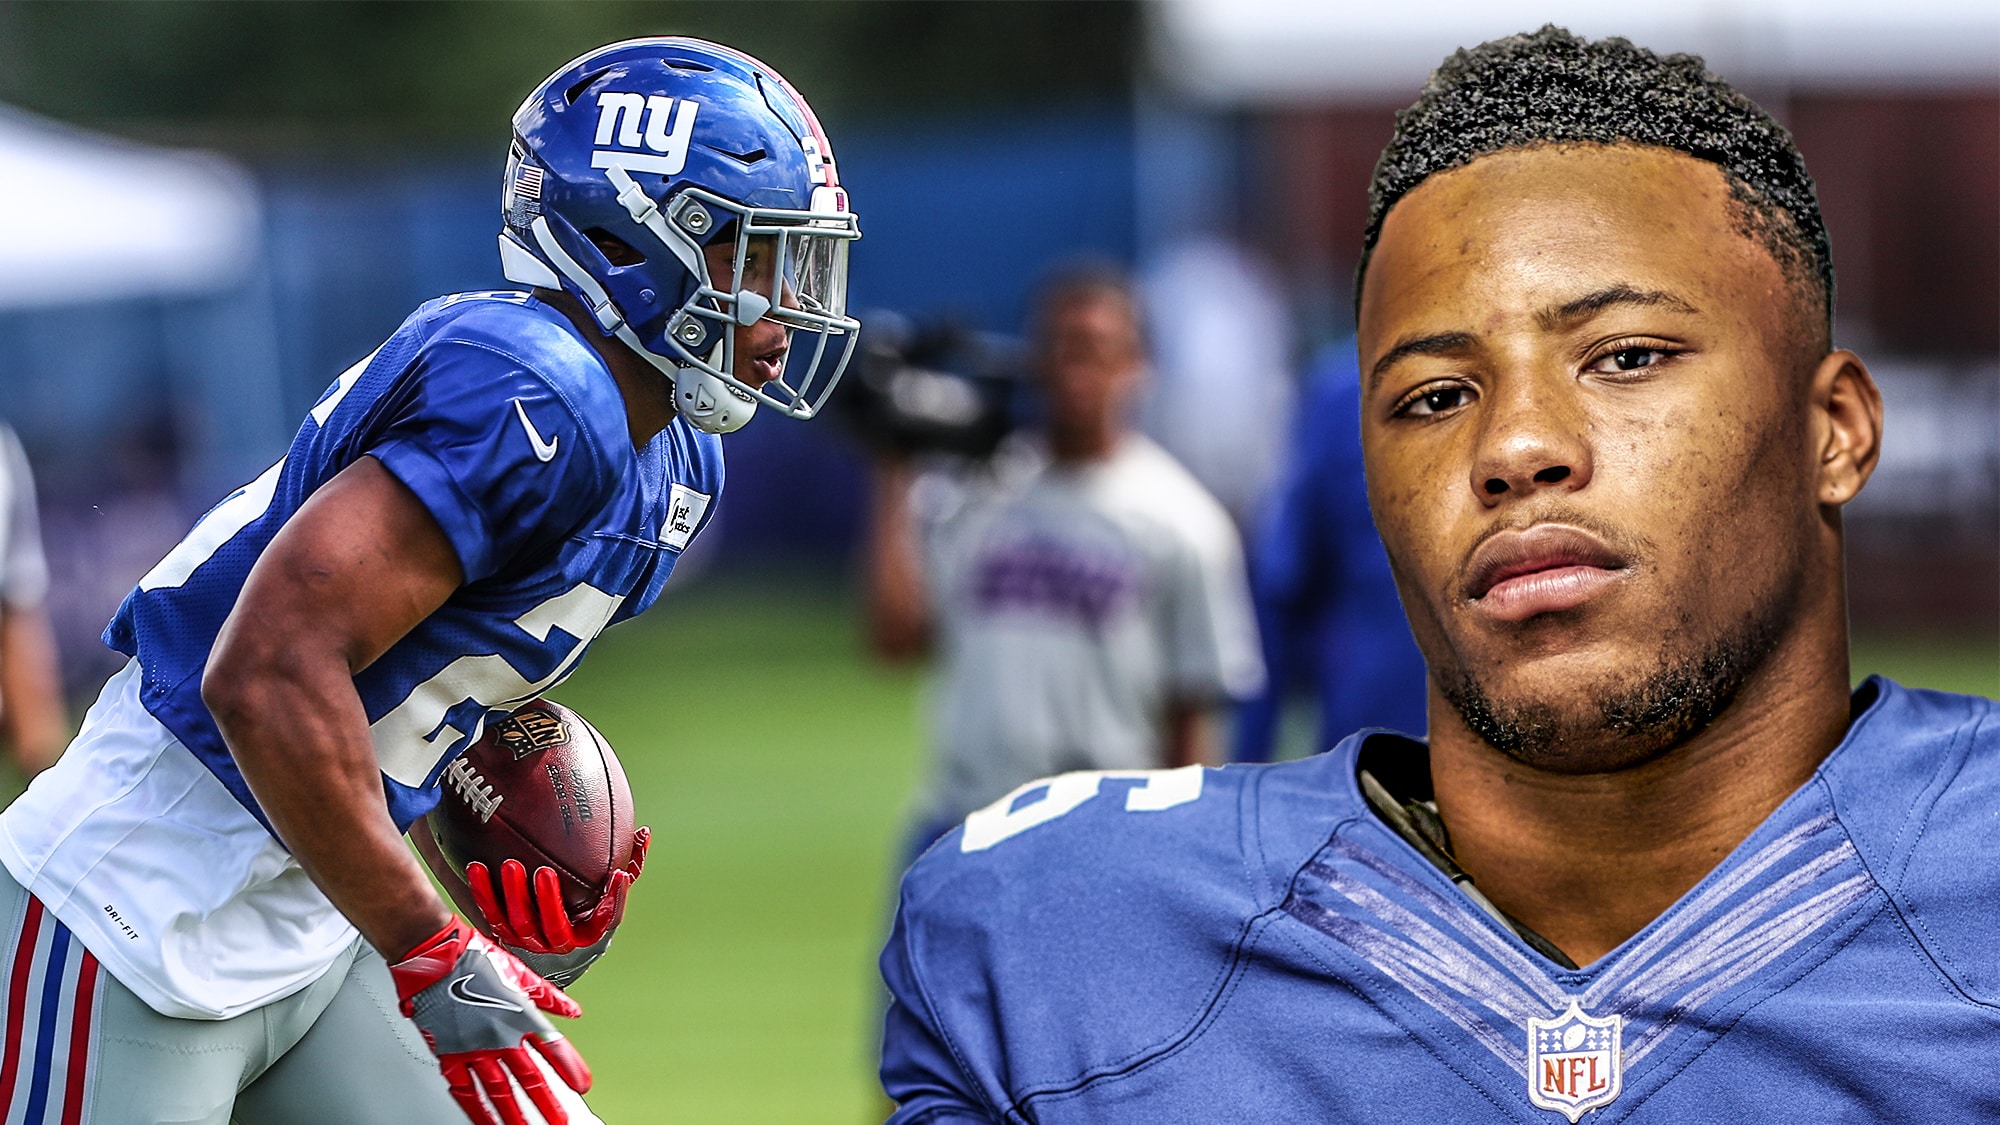 Giants RB Saquon Barkley: 3 Reasons To Regret The No. 2 Pick.